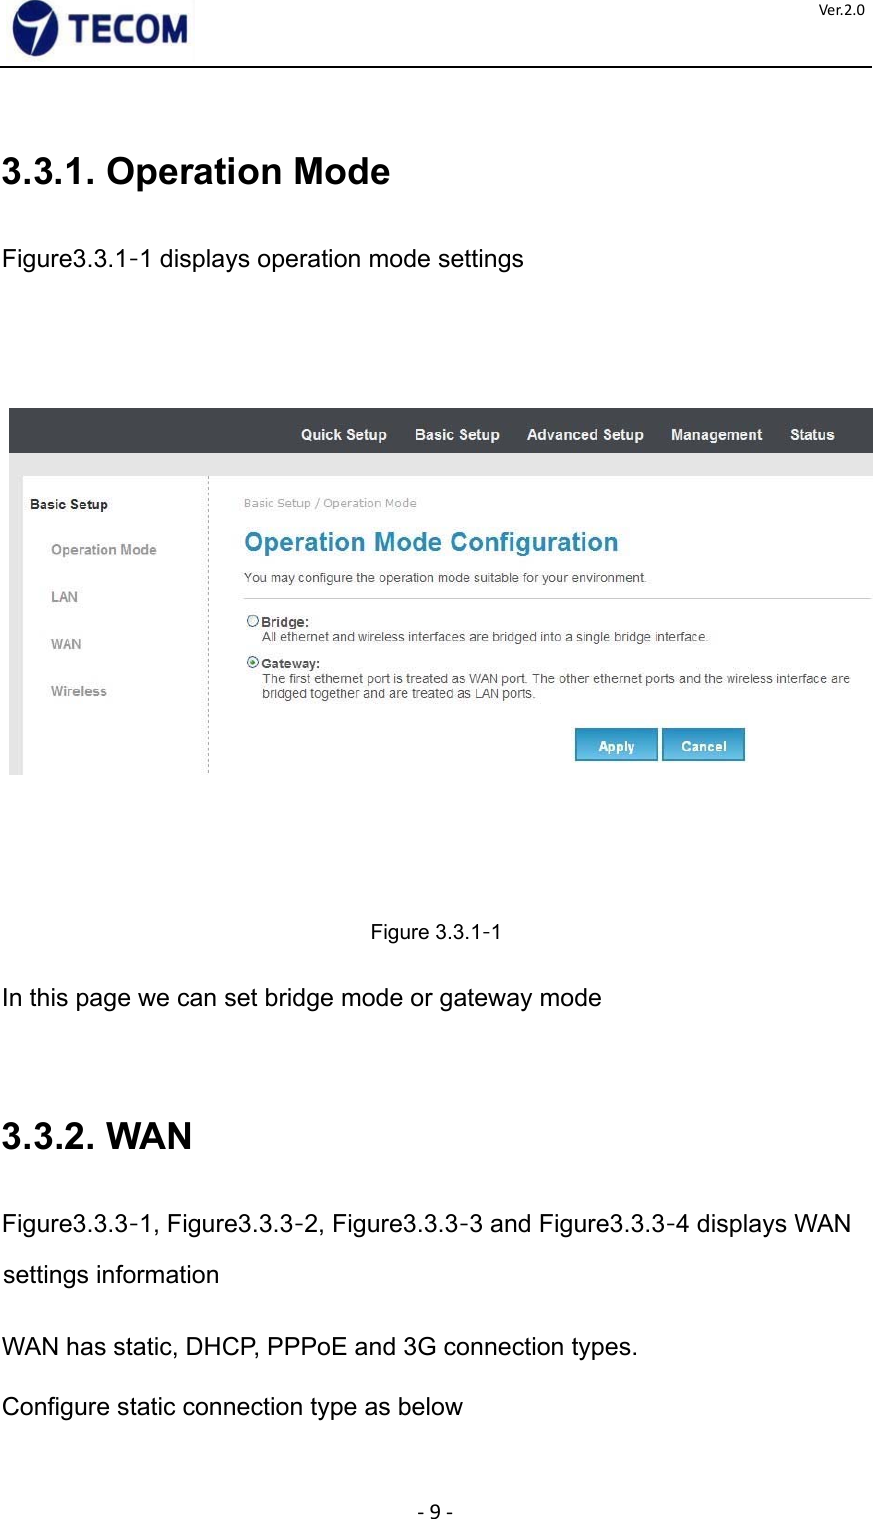  ‐9‐Ver.2.0 3.3.1. Operation Mode    Figure3.3.1‐1 displays operation mode settings                    Figure 3.3.1‐1    In this page we can set bridge mode or gateway mode      3.3.2. WAN    Figure3.3.3‐1, Figure3.3.3‐2, Figure3.3.3‐3 and Figure3.3.3‐4 displays WAN settings information    WAN has static, DHCP, PPPoE and 3G connection types.  Configure static connection type as below      